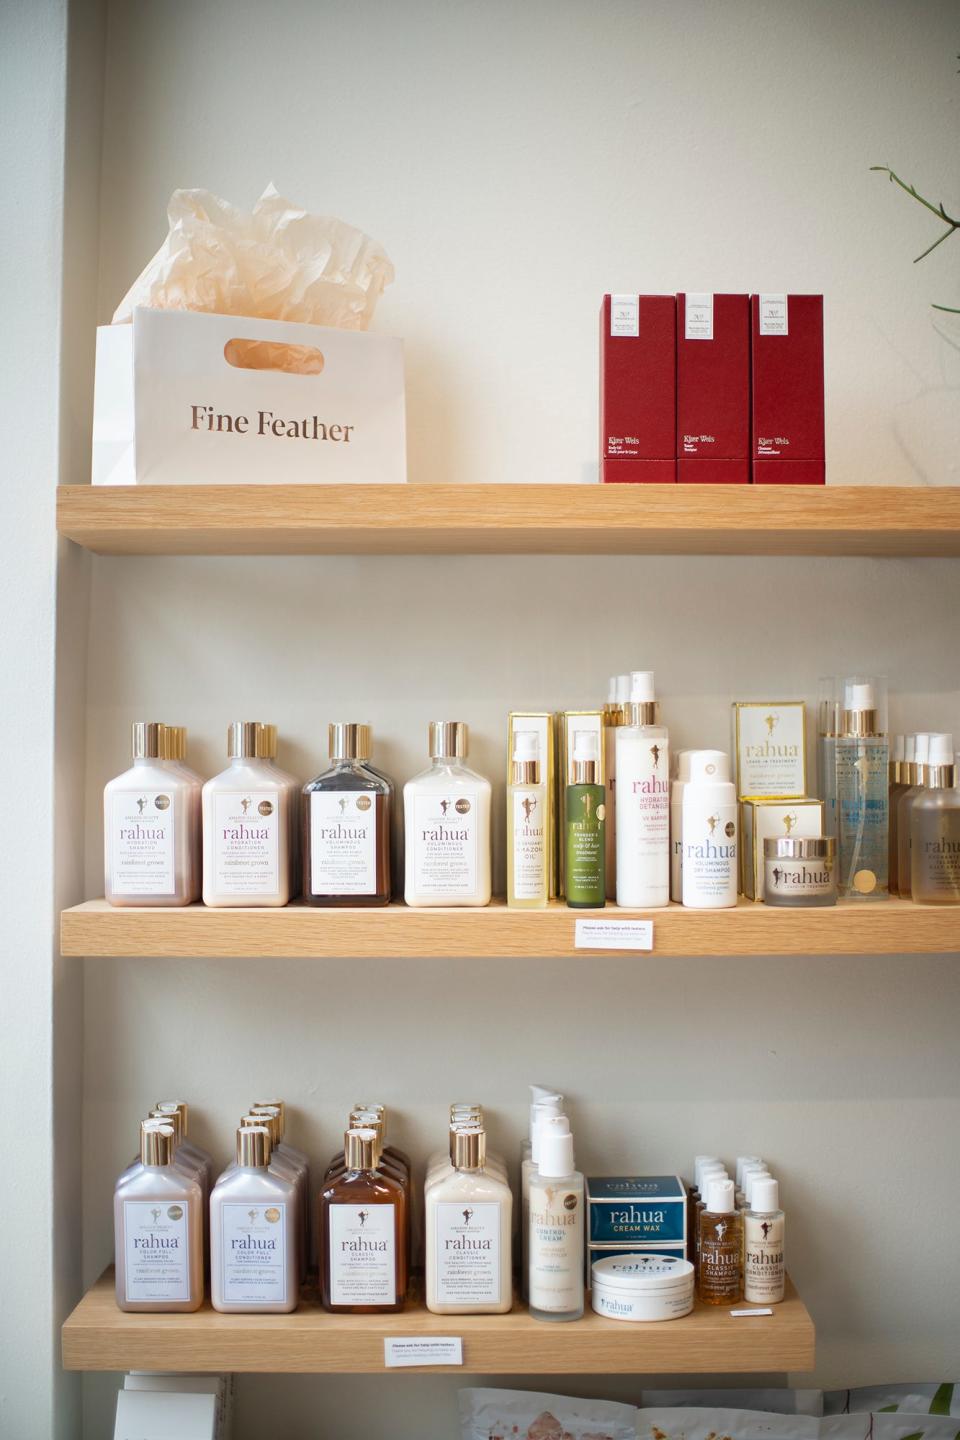 Fine Feather sells "clean" beauty products and offers consultations for customers.